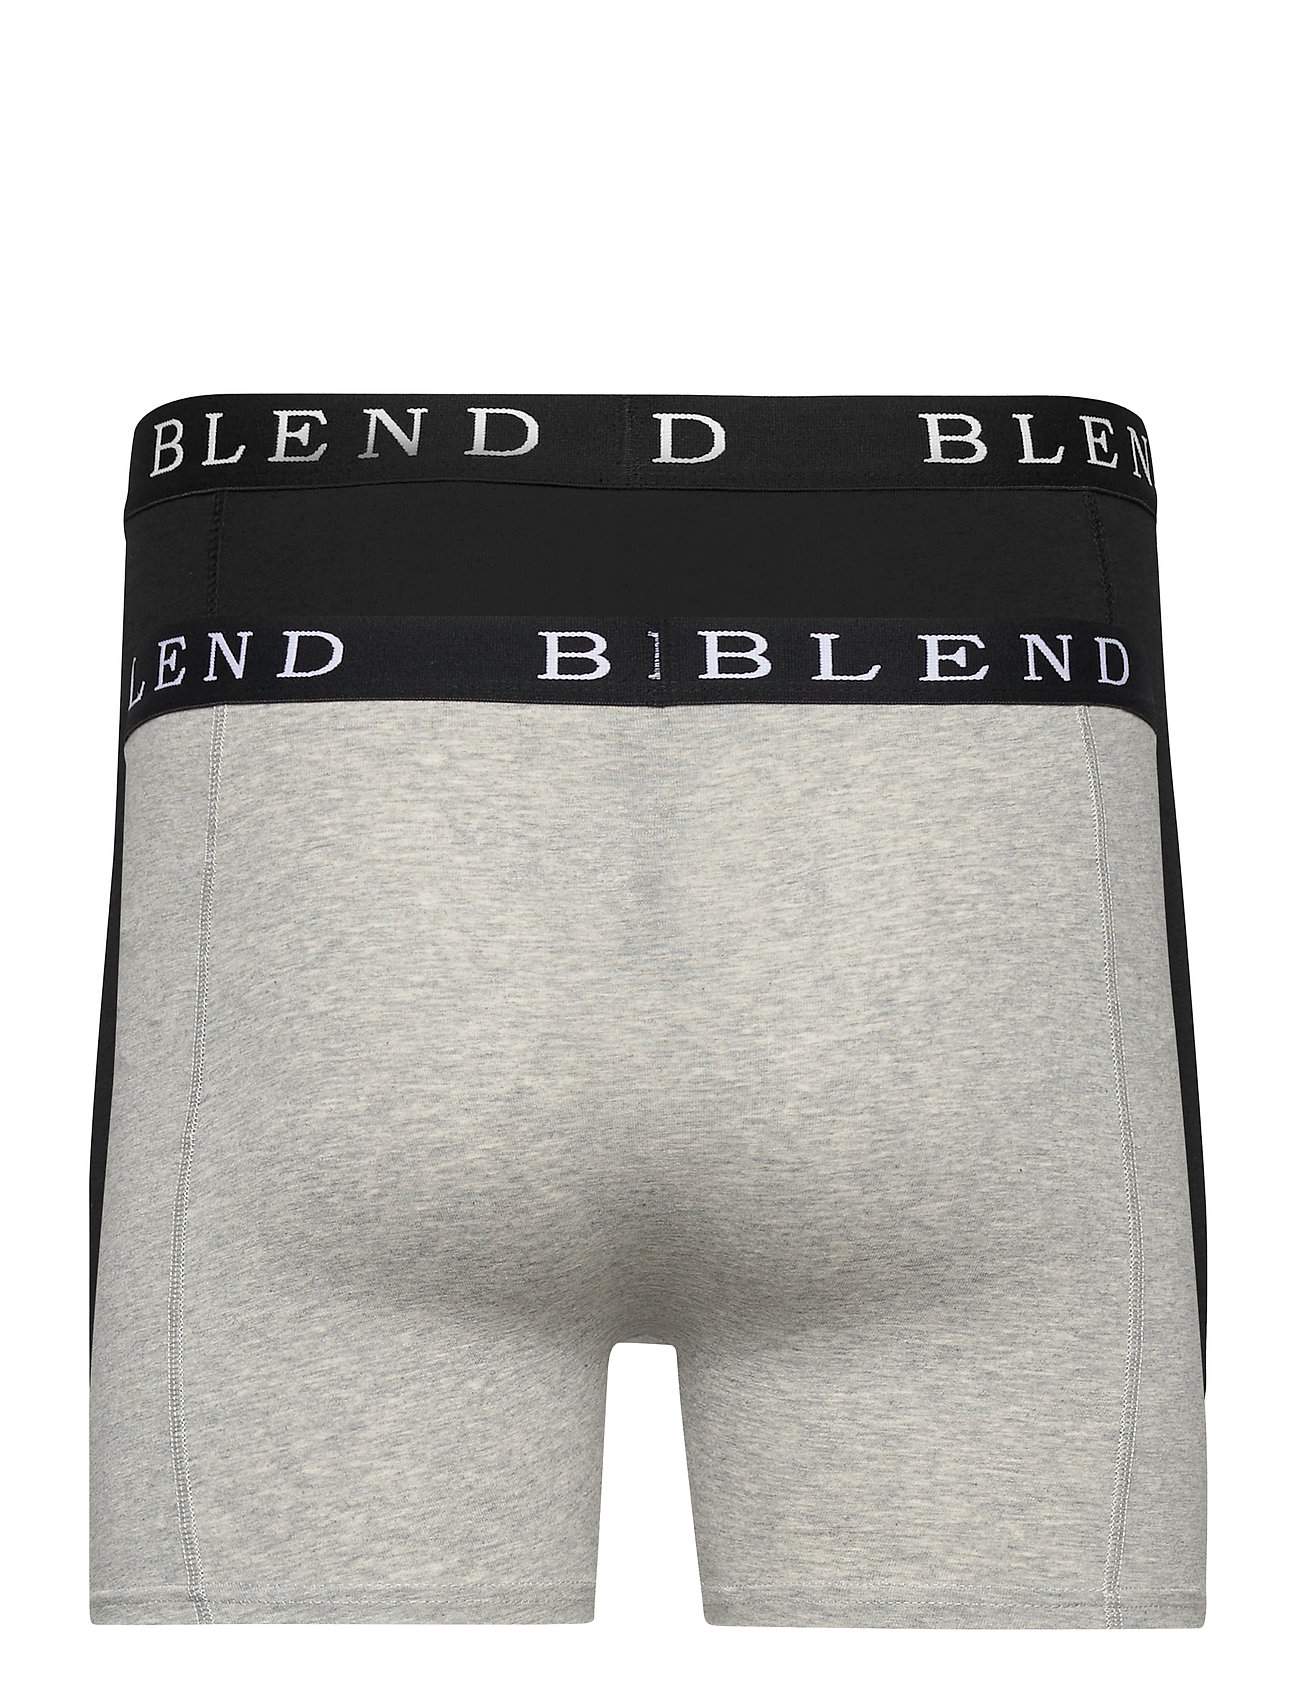 Blend - BHNED underwear 2-pack - multipack underpants - black/stone mix - 1